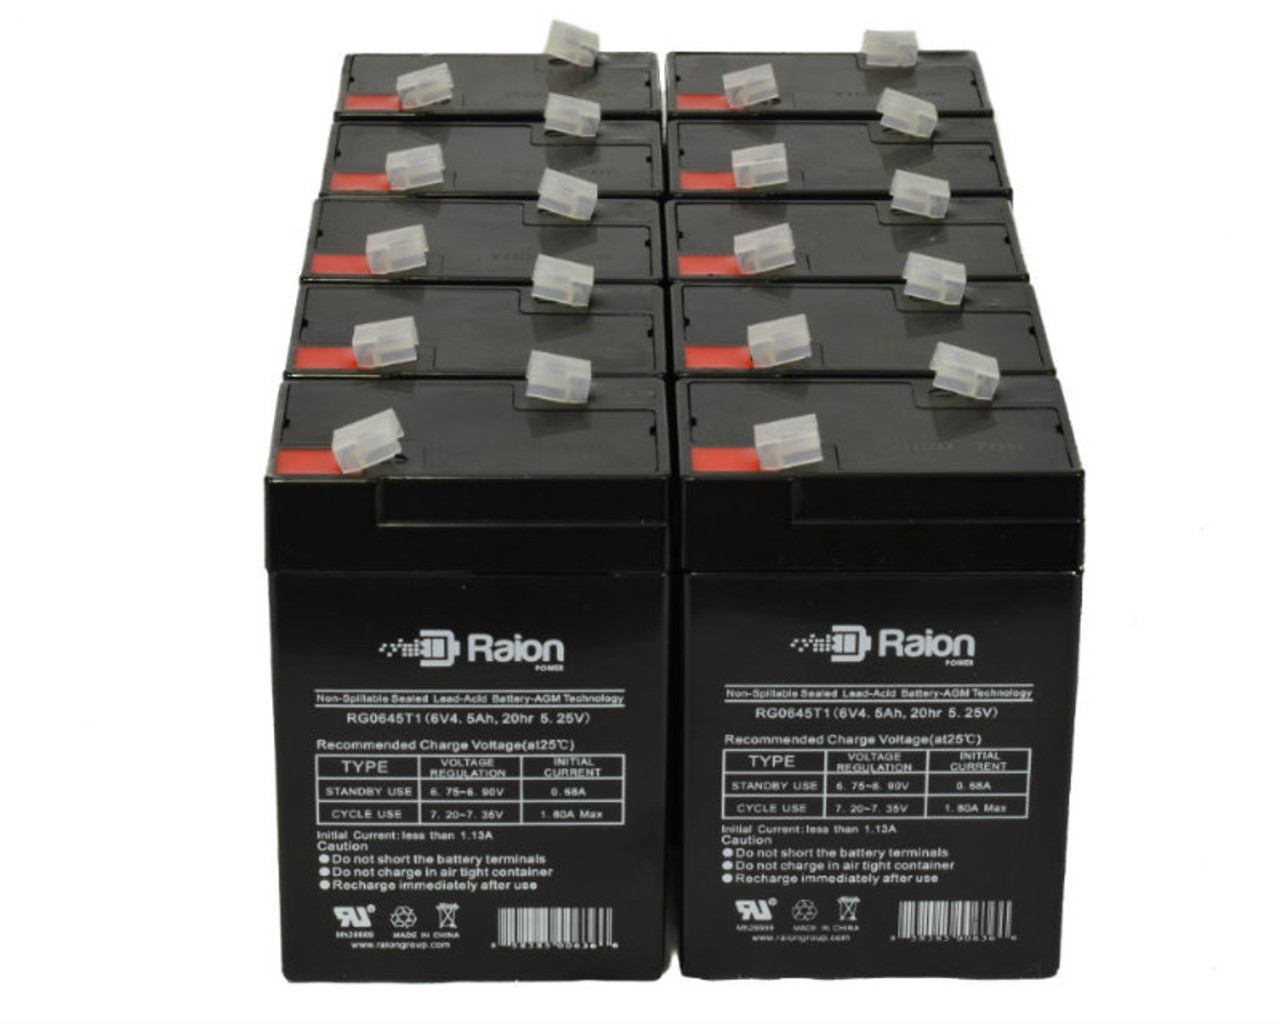 Raion Power 6 Volt 4.5Ah RG0645T1 Replacement Battery for Duramp NP6-6 - 10 Pack